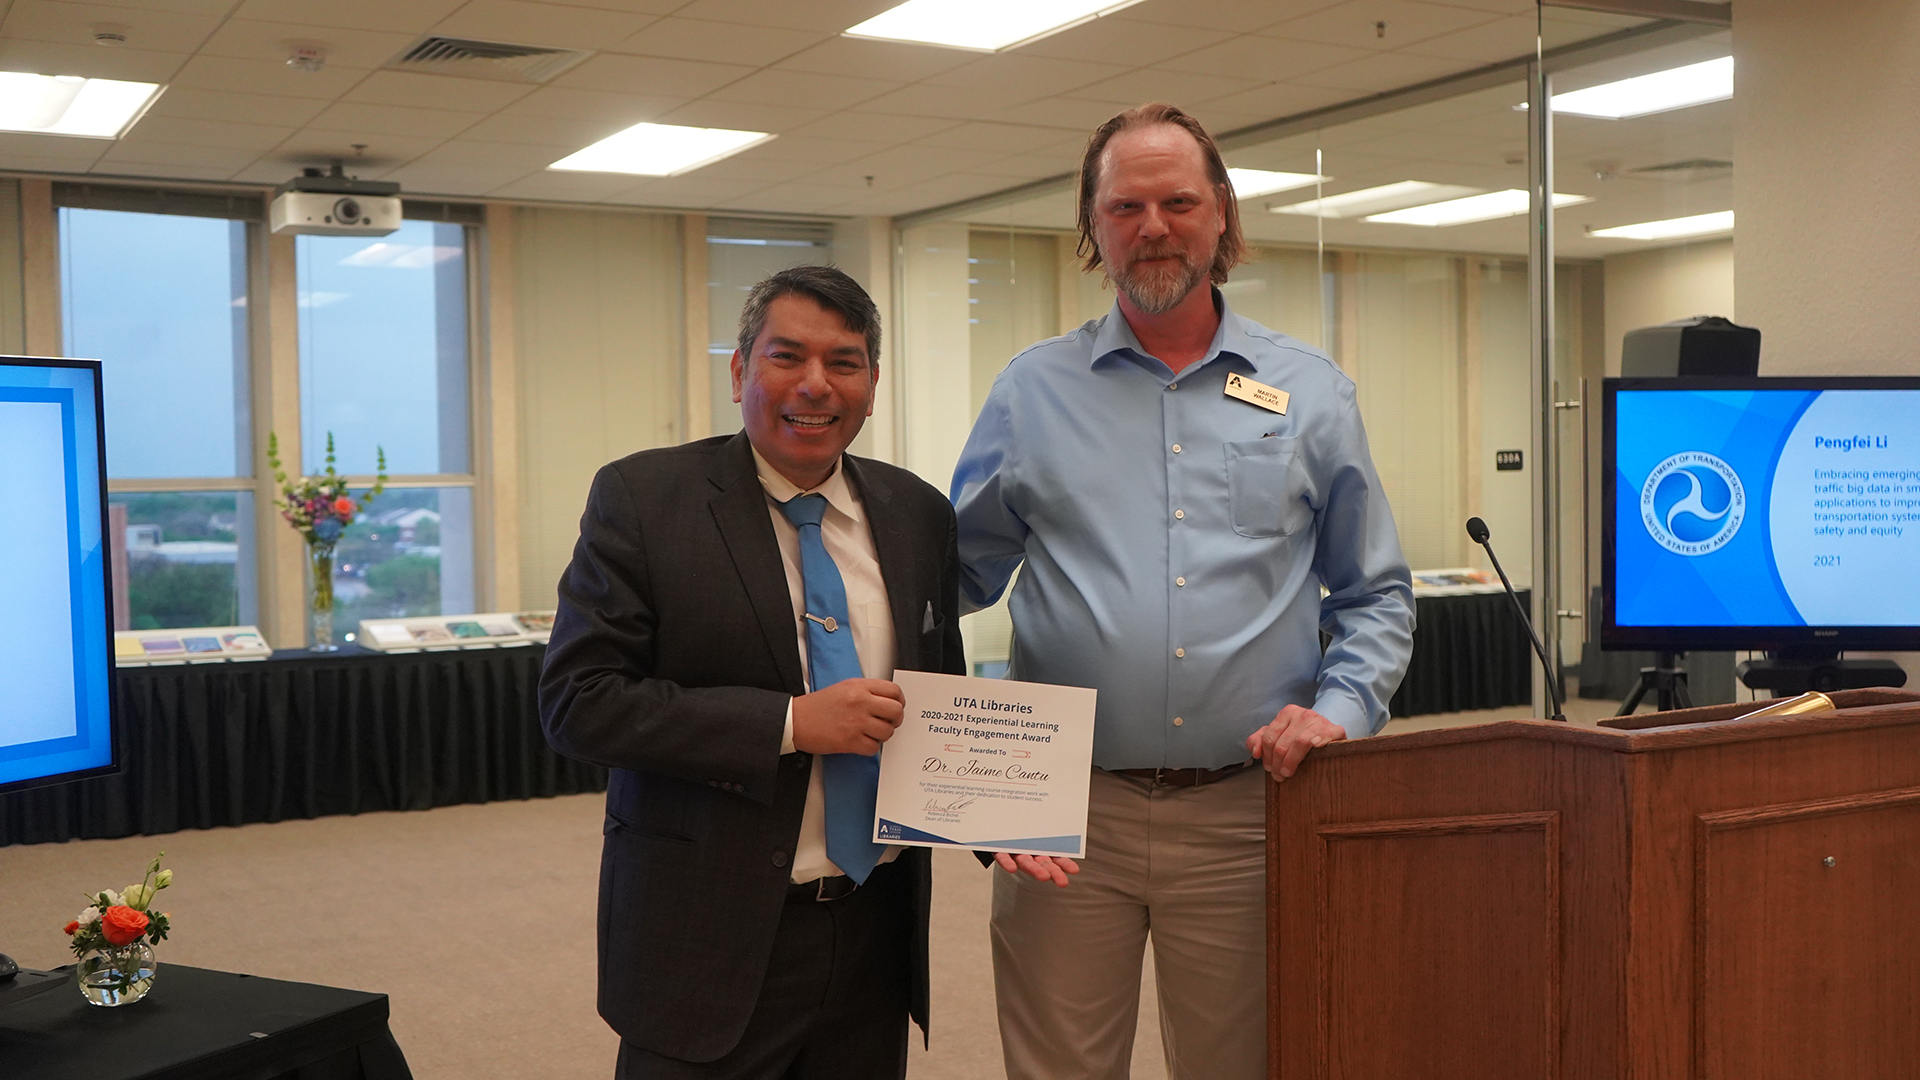 Dr. Jaime Cantu and Experiential Learning Librarian Martin Wallace pose with a paper award in the Atrium of Central Library.